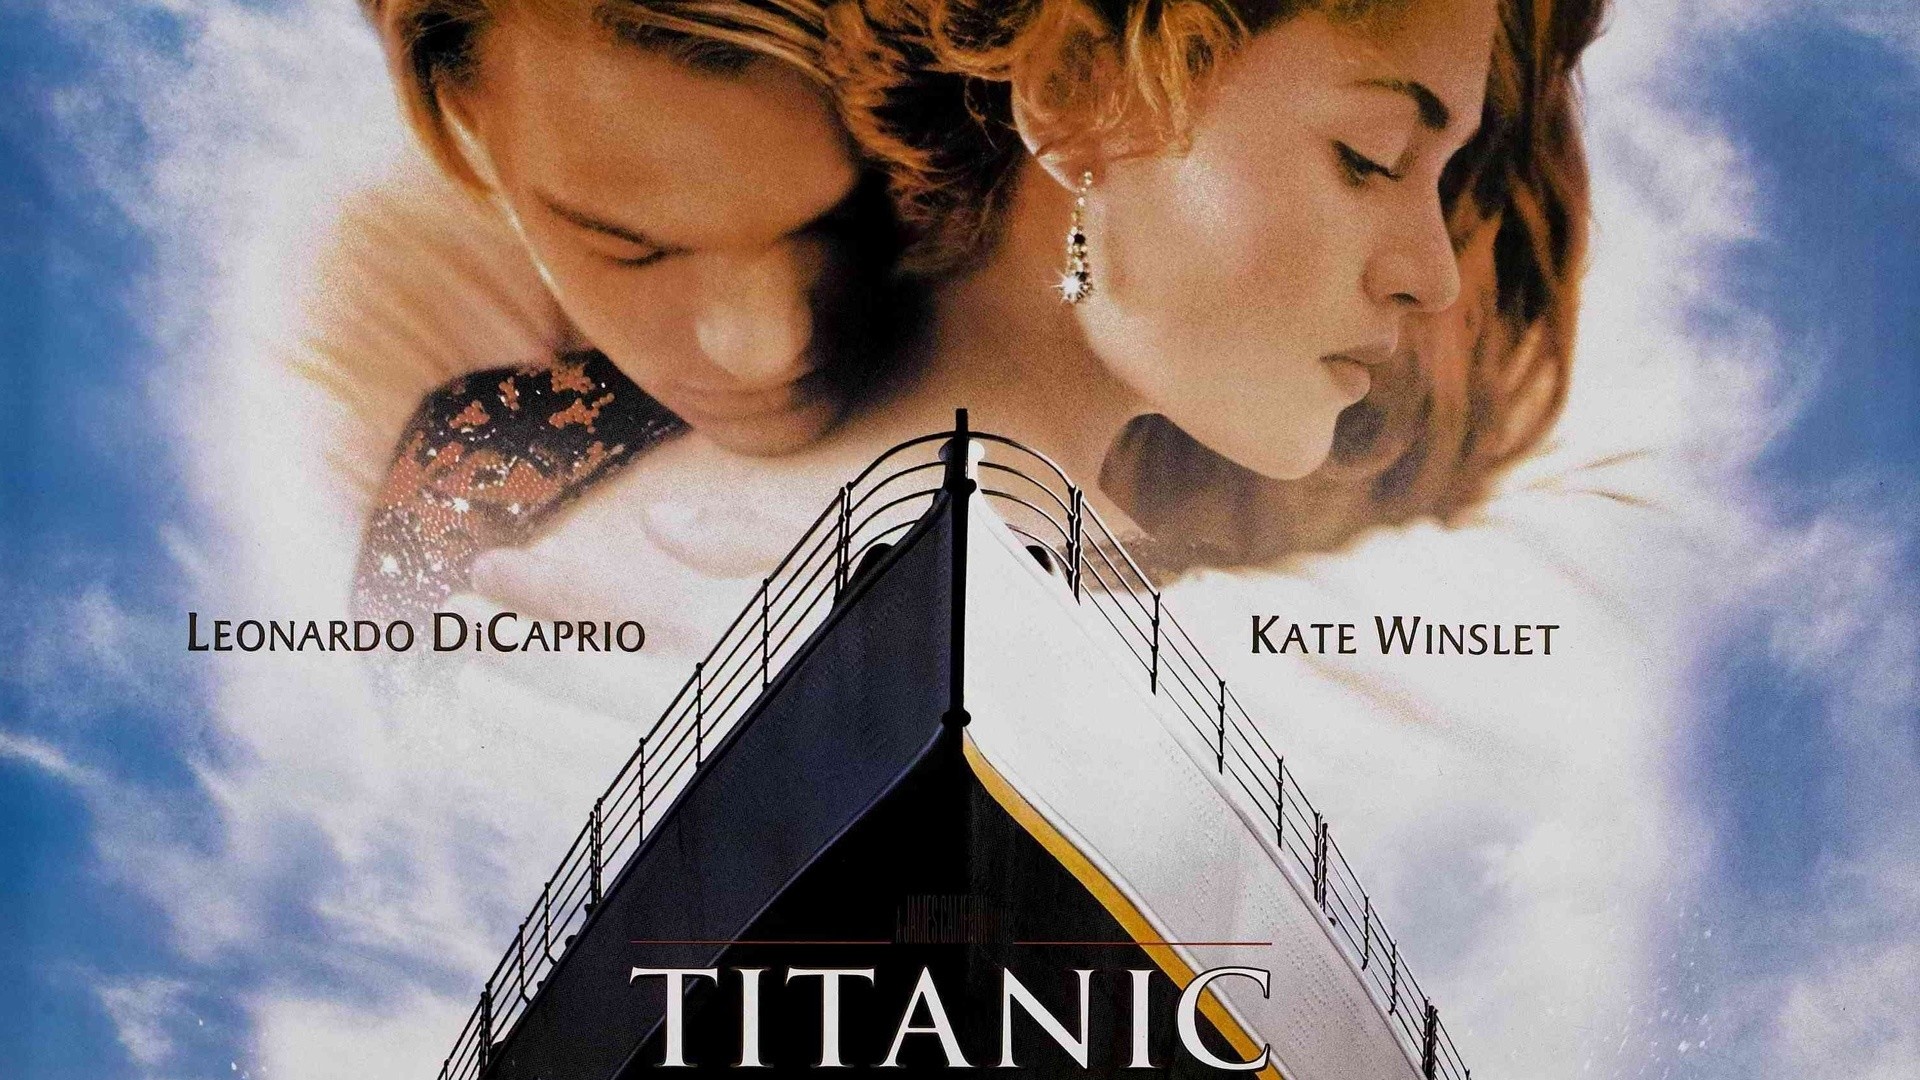 Things You Probably Didn't Know About 'Titanic' Movie